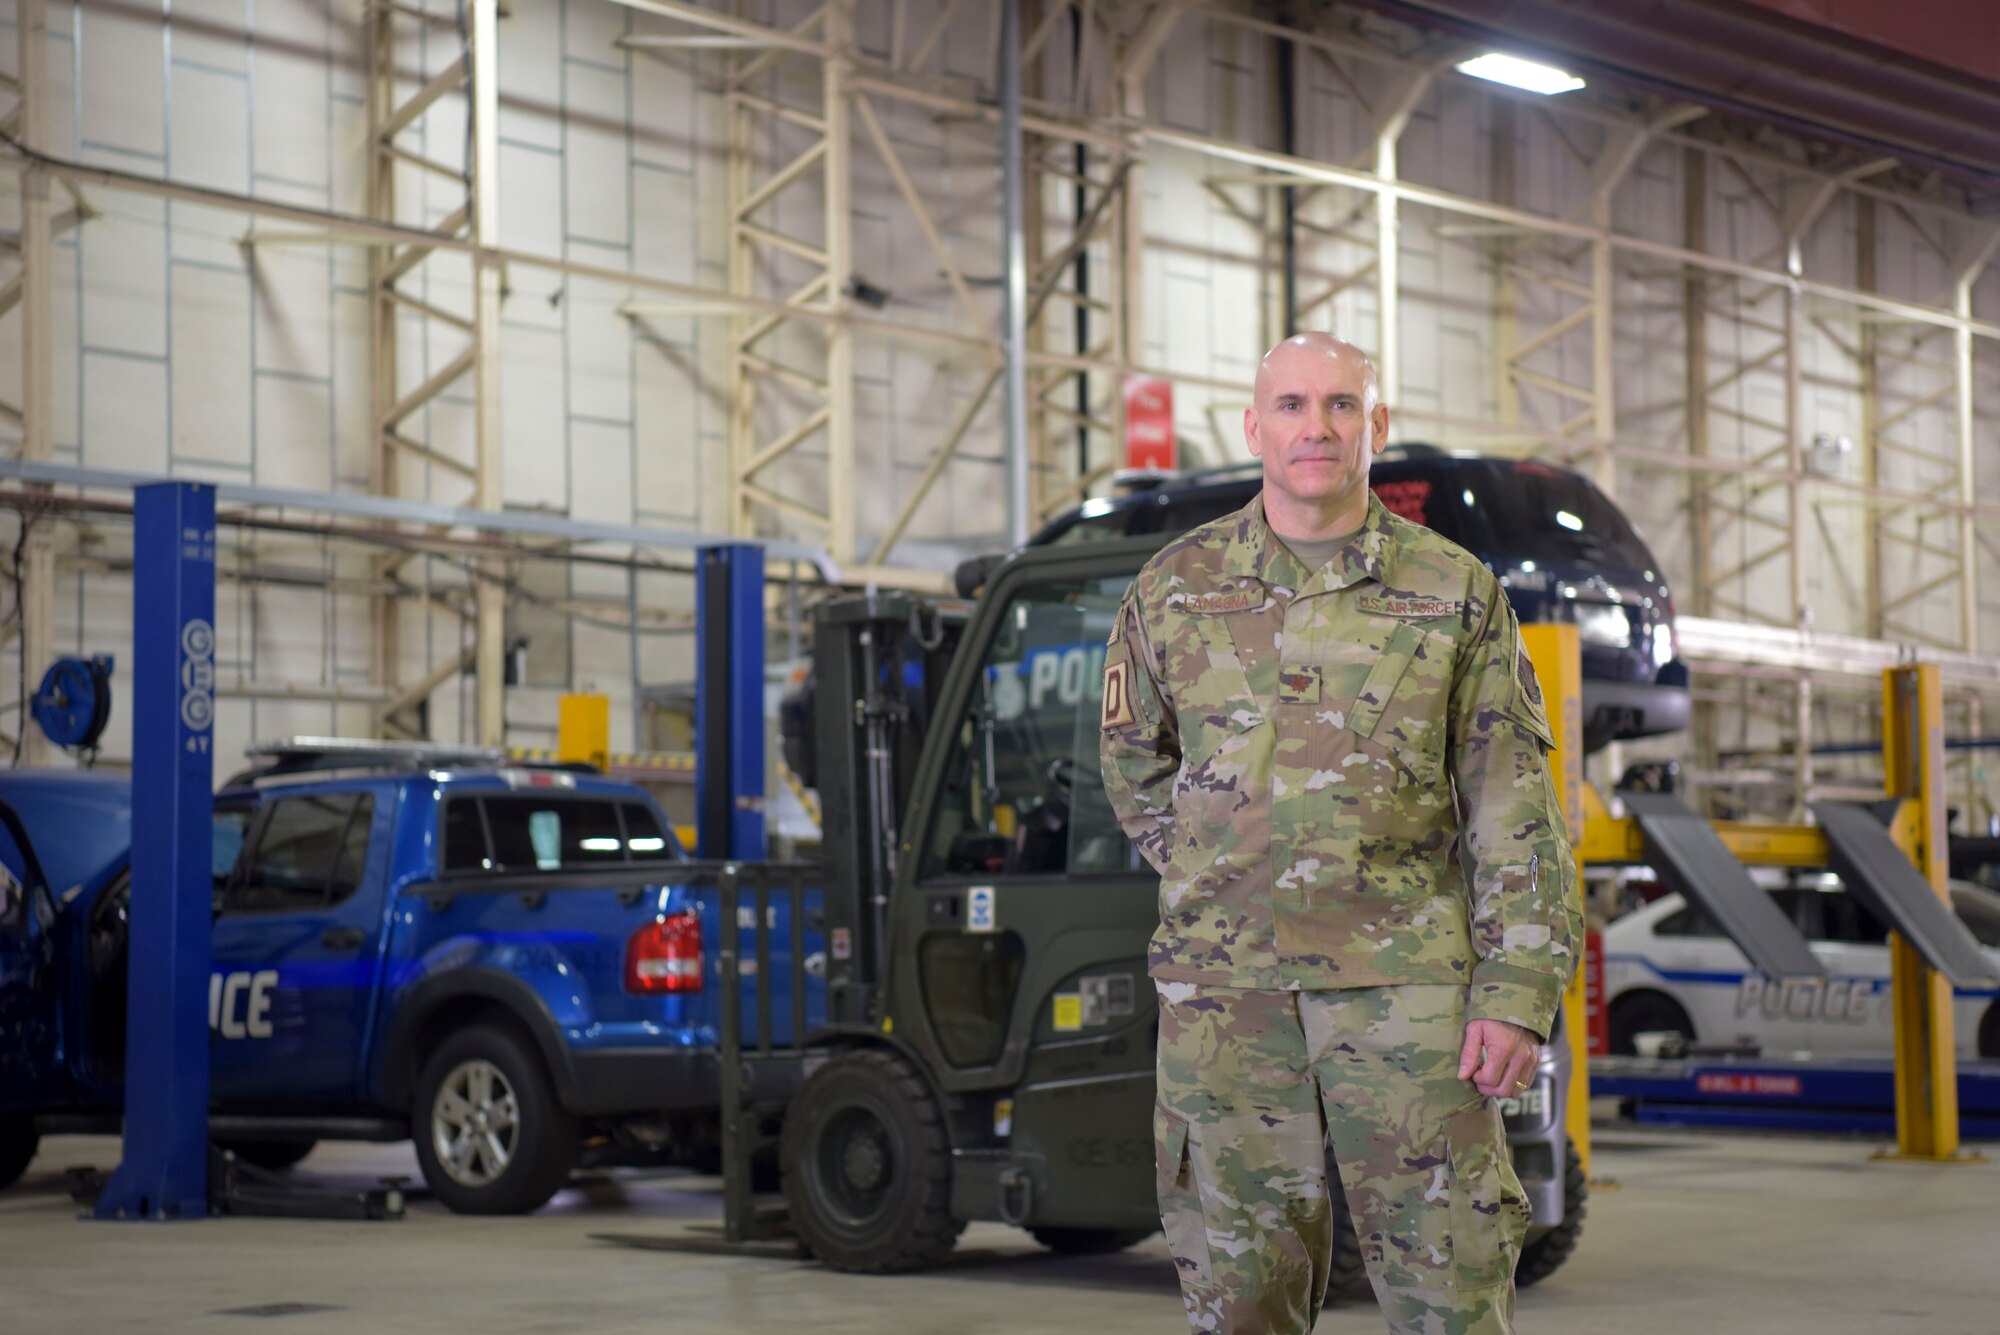 U.S. Air Force Maj. Anthony LaMagna, 100th Logistics Readiness Squadron commander, poses for a photo at RAF Mildenhall, England, May 2, 2019. LaMagna participates in ‘Walking with Warriors’ once a week, where all leadership leave their desk and interact with Airmen, from top leadership on down.   (U.S. Air Force photo by Senior Airman Alexandria Lee)